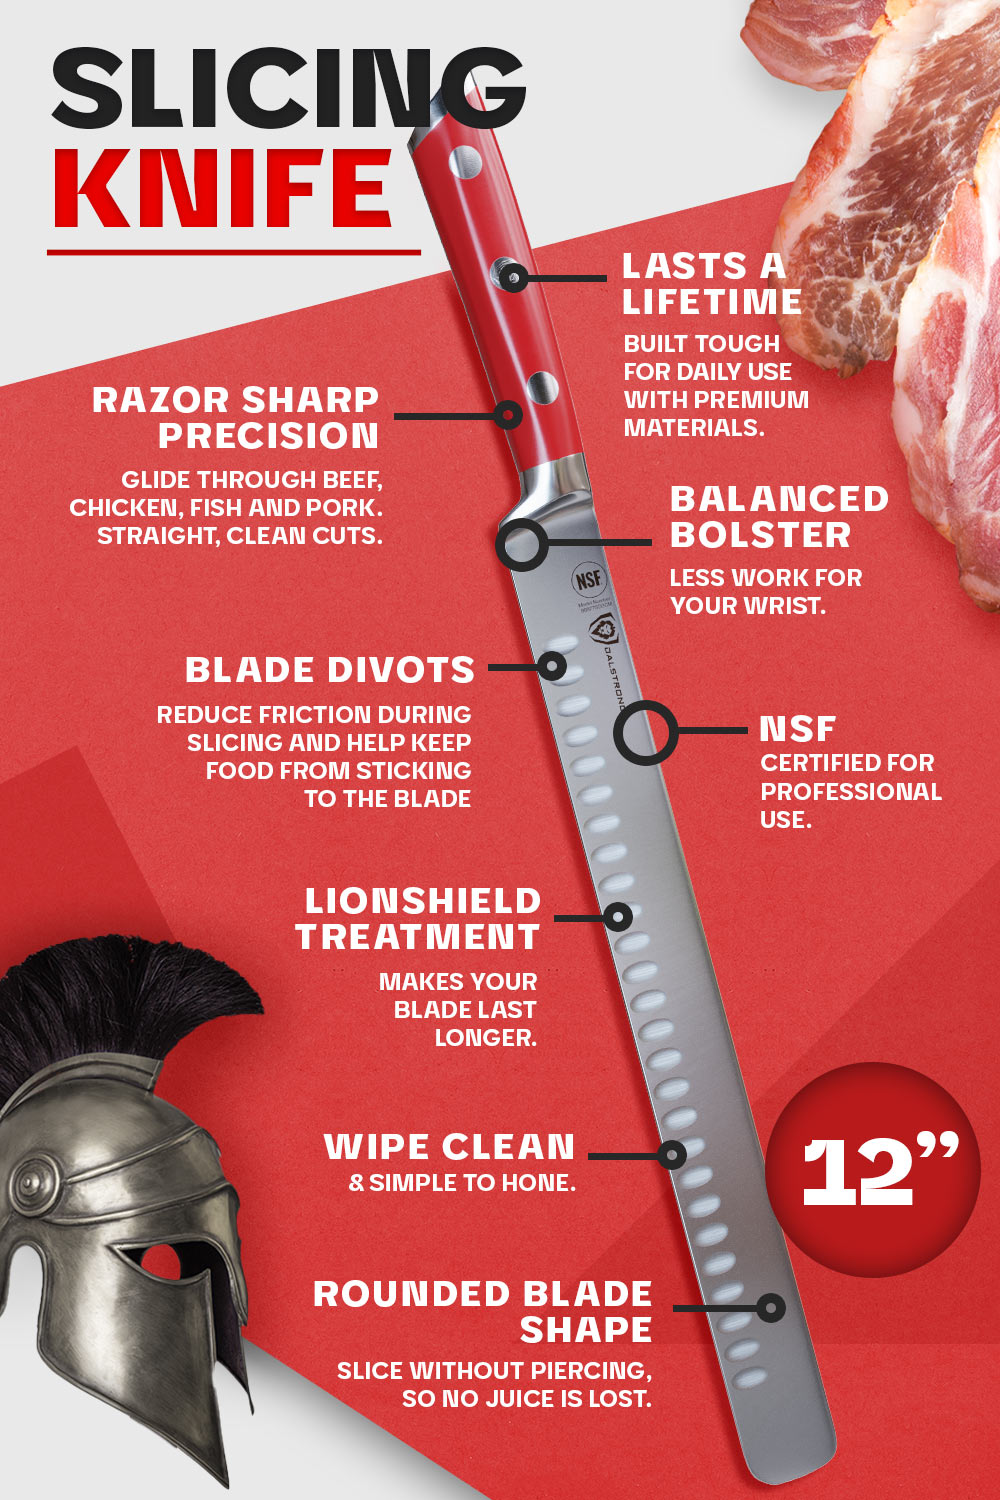 Dalstrong gladiator series 12 inch slicer knife with red handle specification.